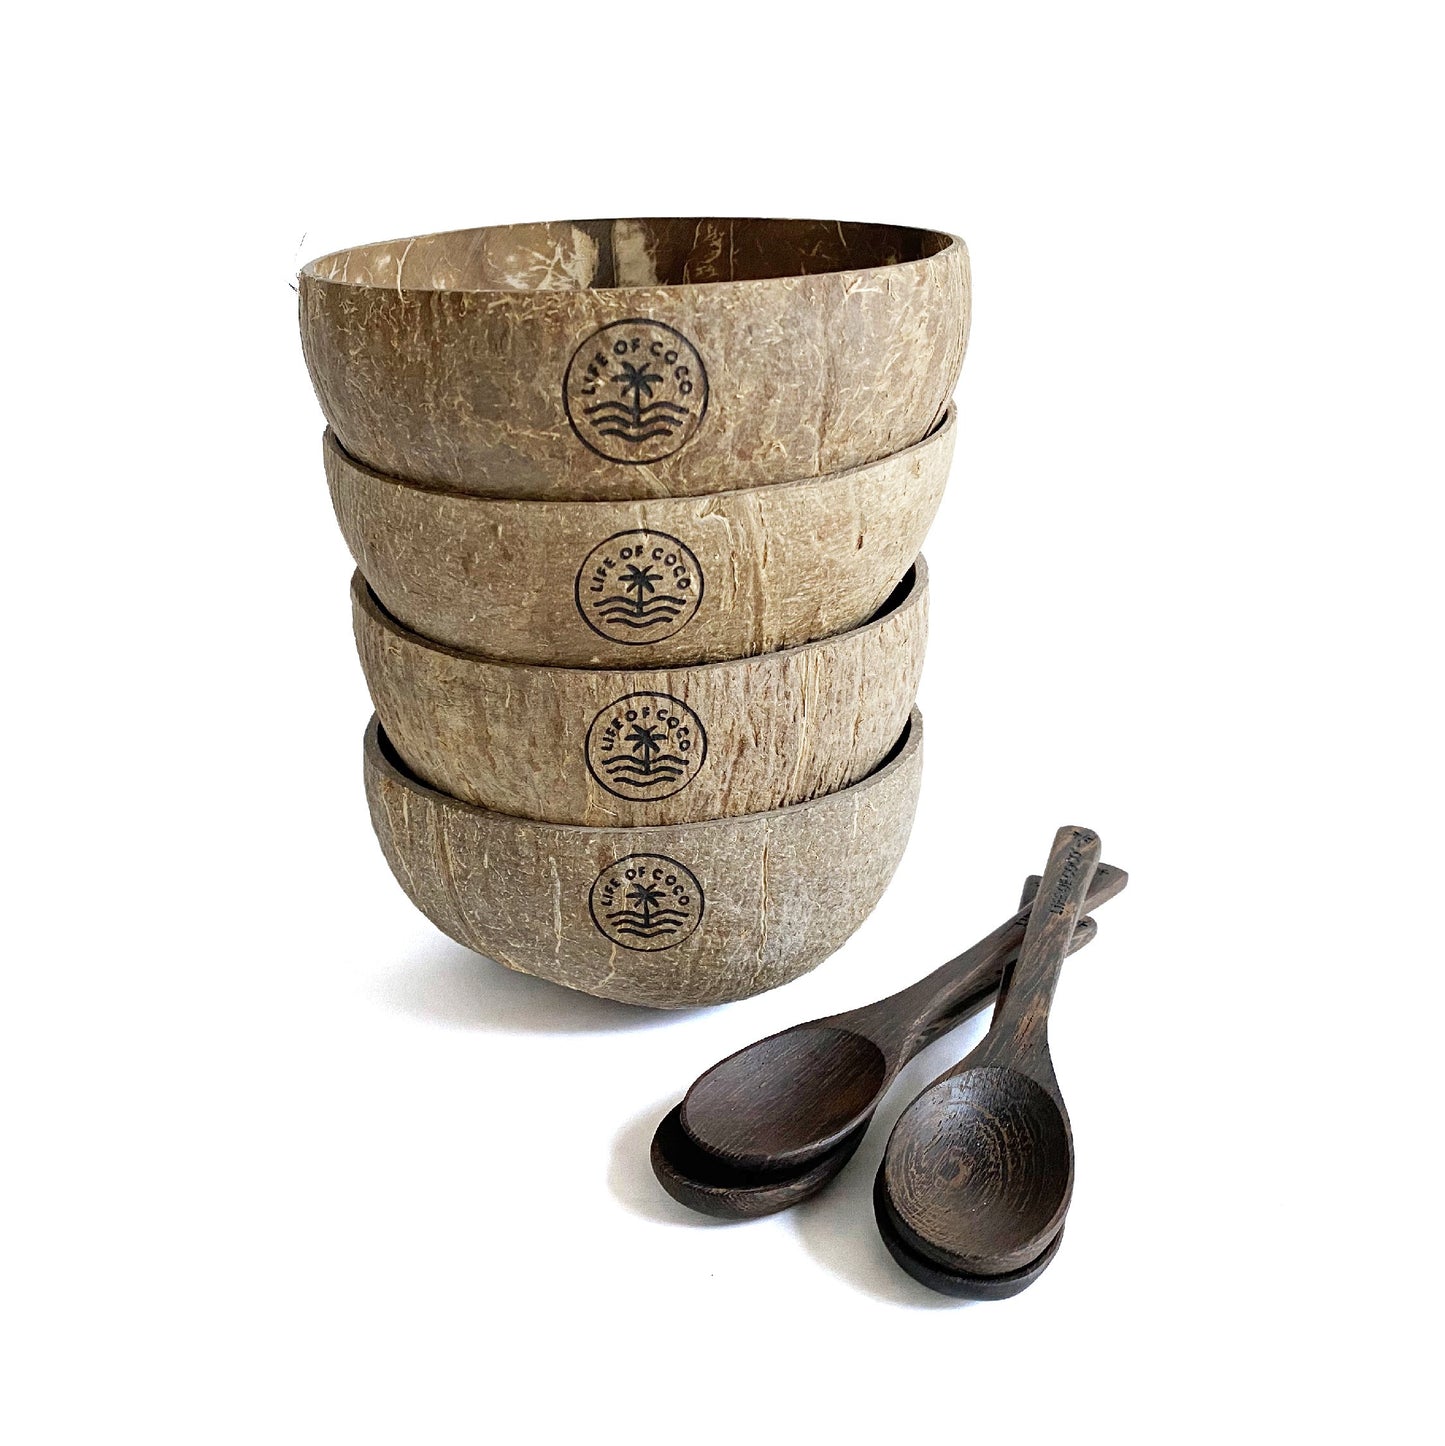 coconut bowls and spoon pack